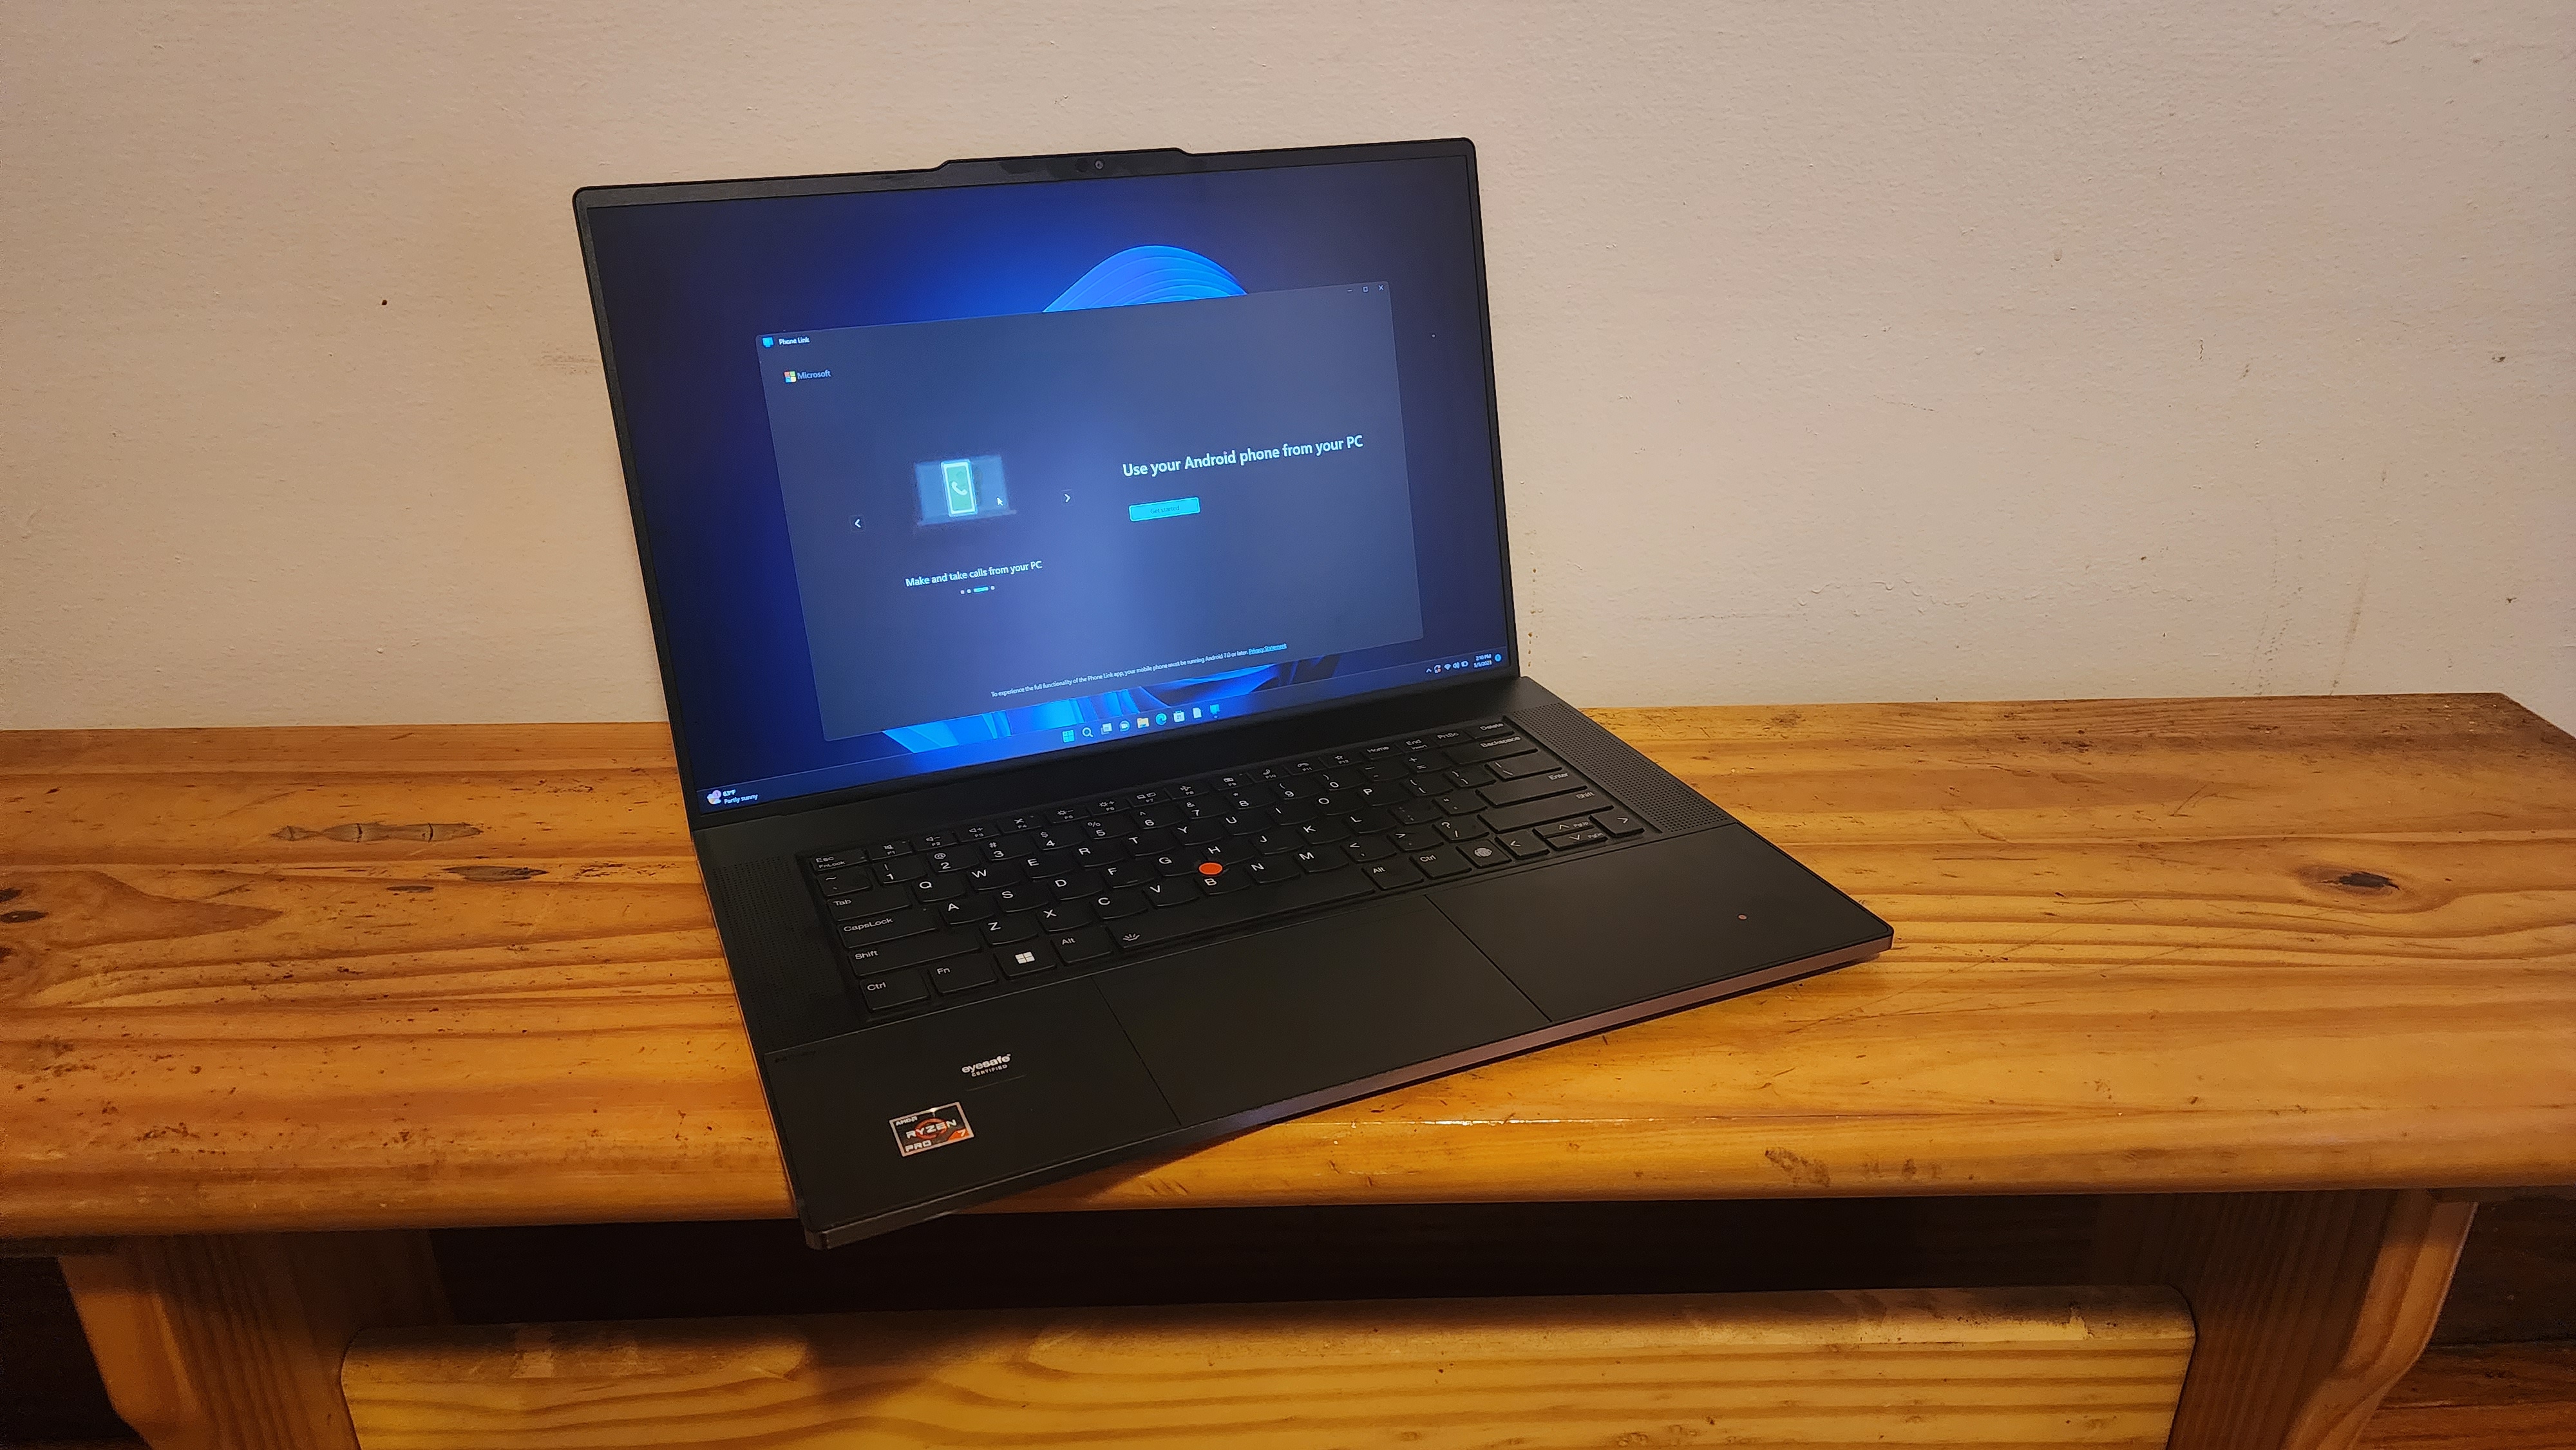 New ThinkPad is a trusty favorite for business users